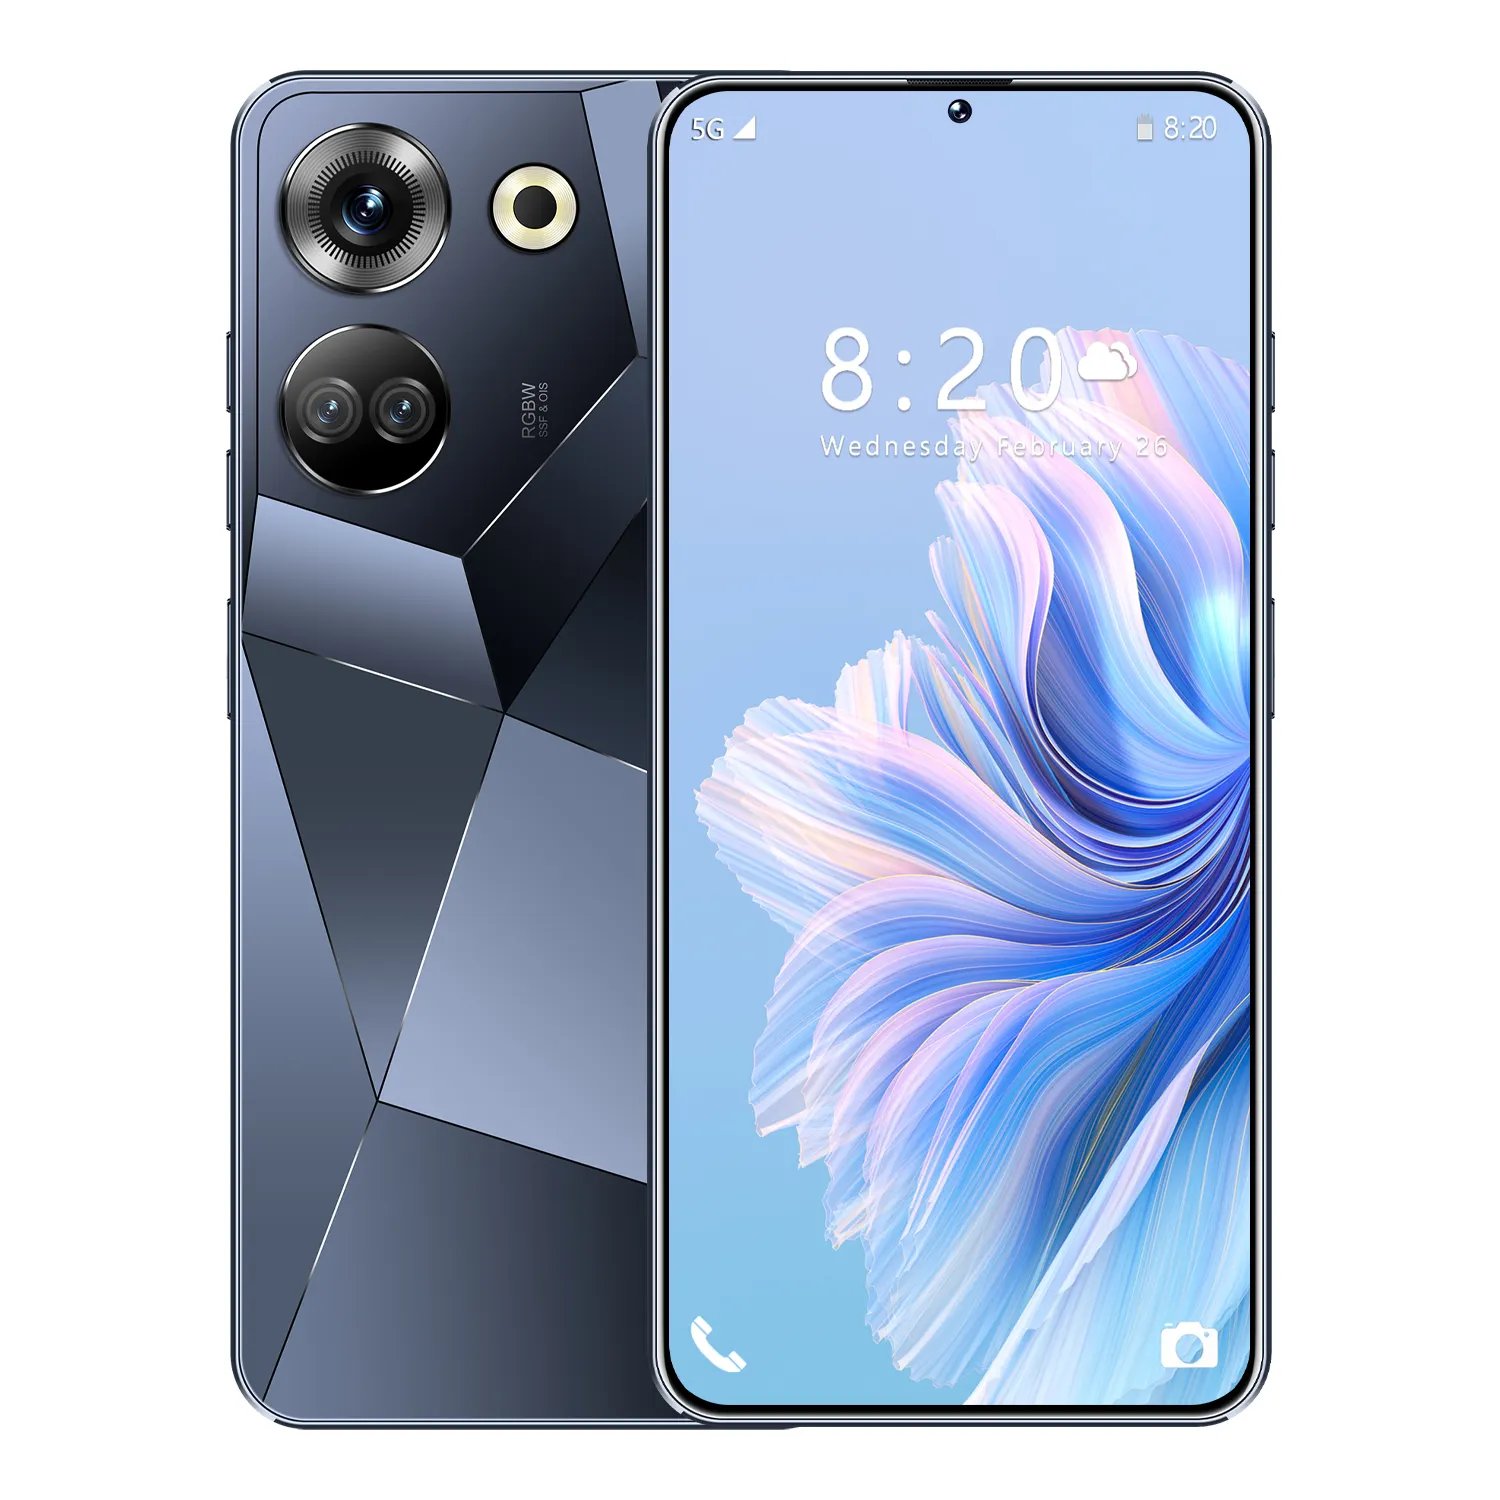 Preiswert entsperrtes 4g smartphone 6.55-incell HD c20 Pro 3+64gb 5+13mp 4000 mah dual card MTK6739 quad core Android 10.0 handys